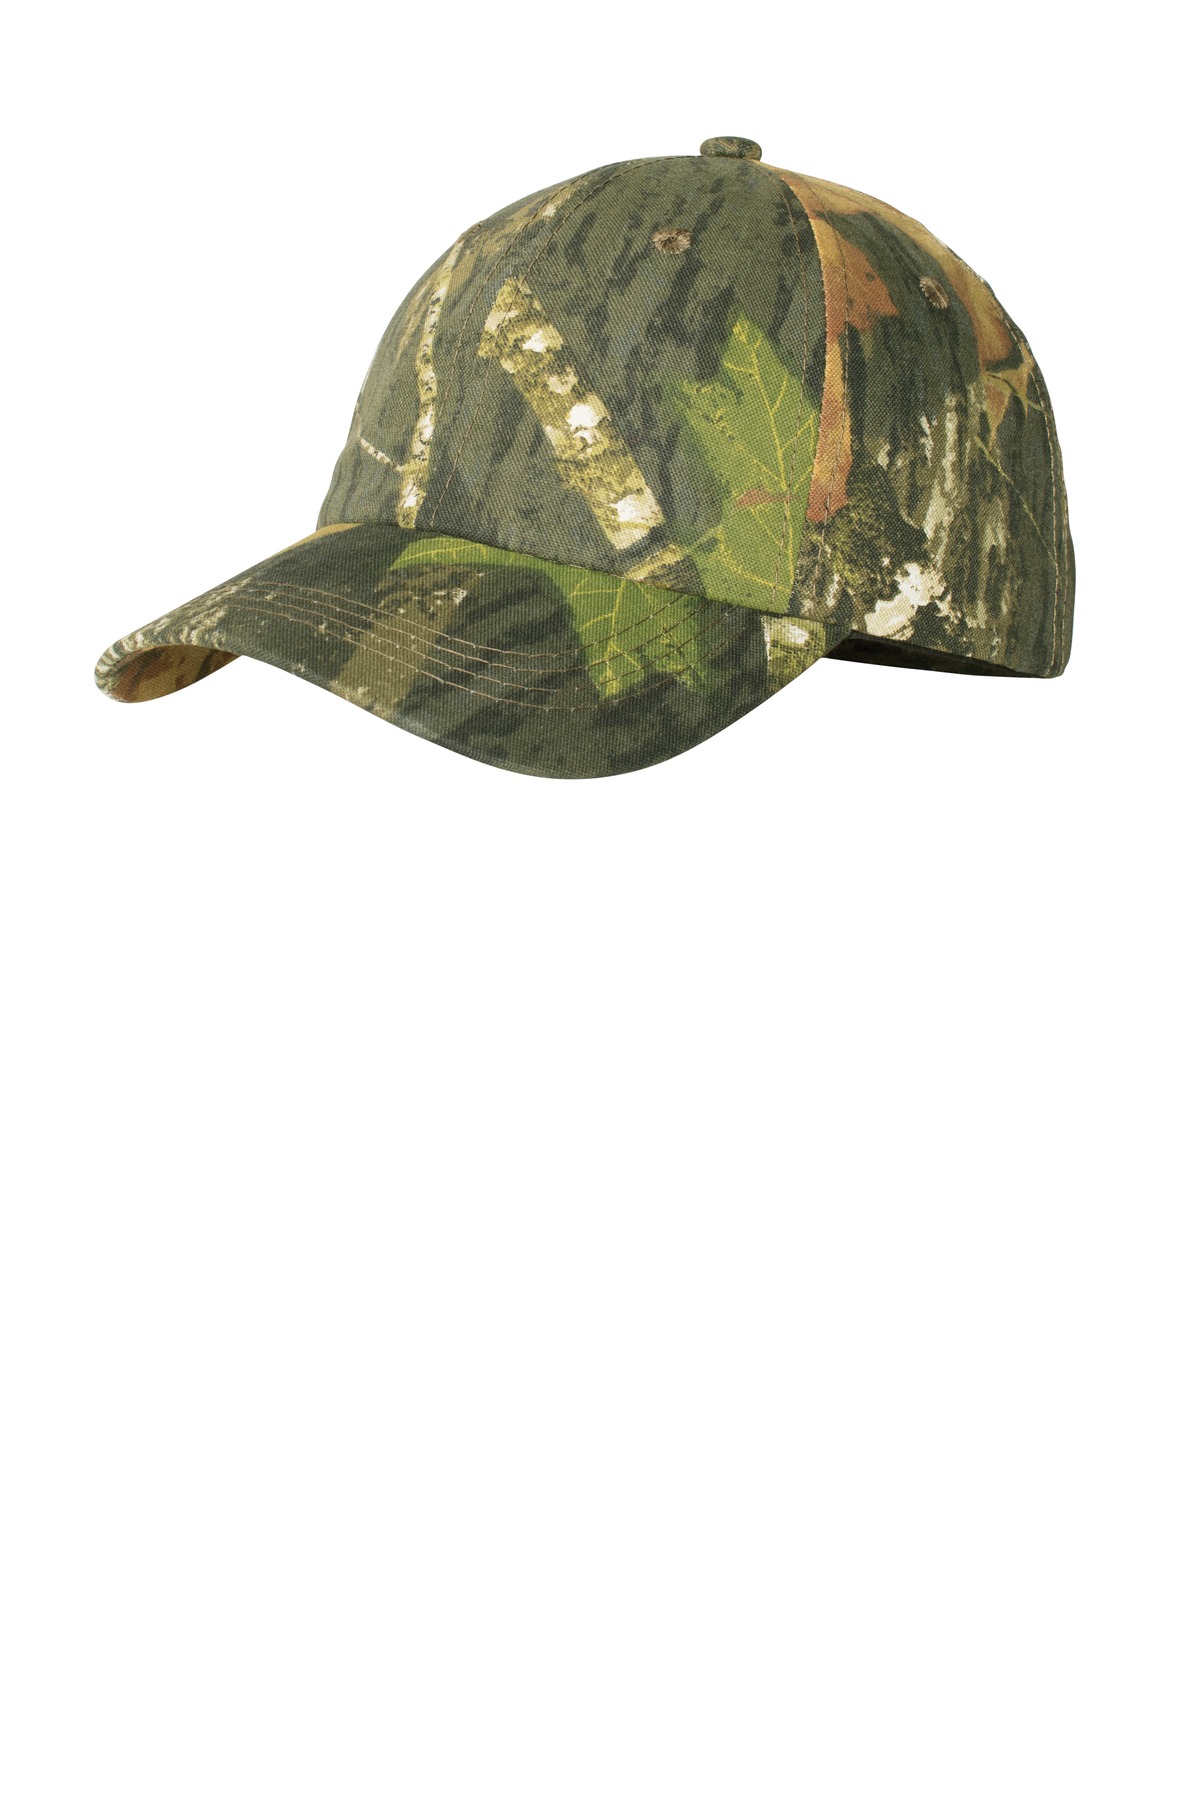 Port Authority Pro Camouflage Series Garment-Washed Cap-